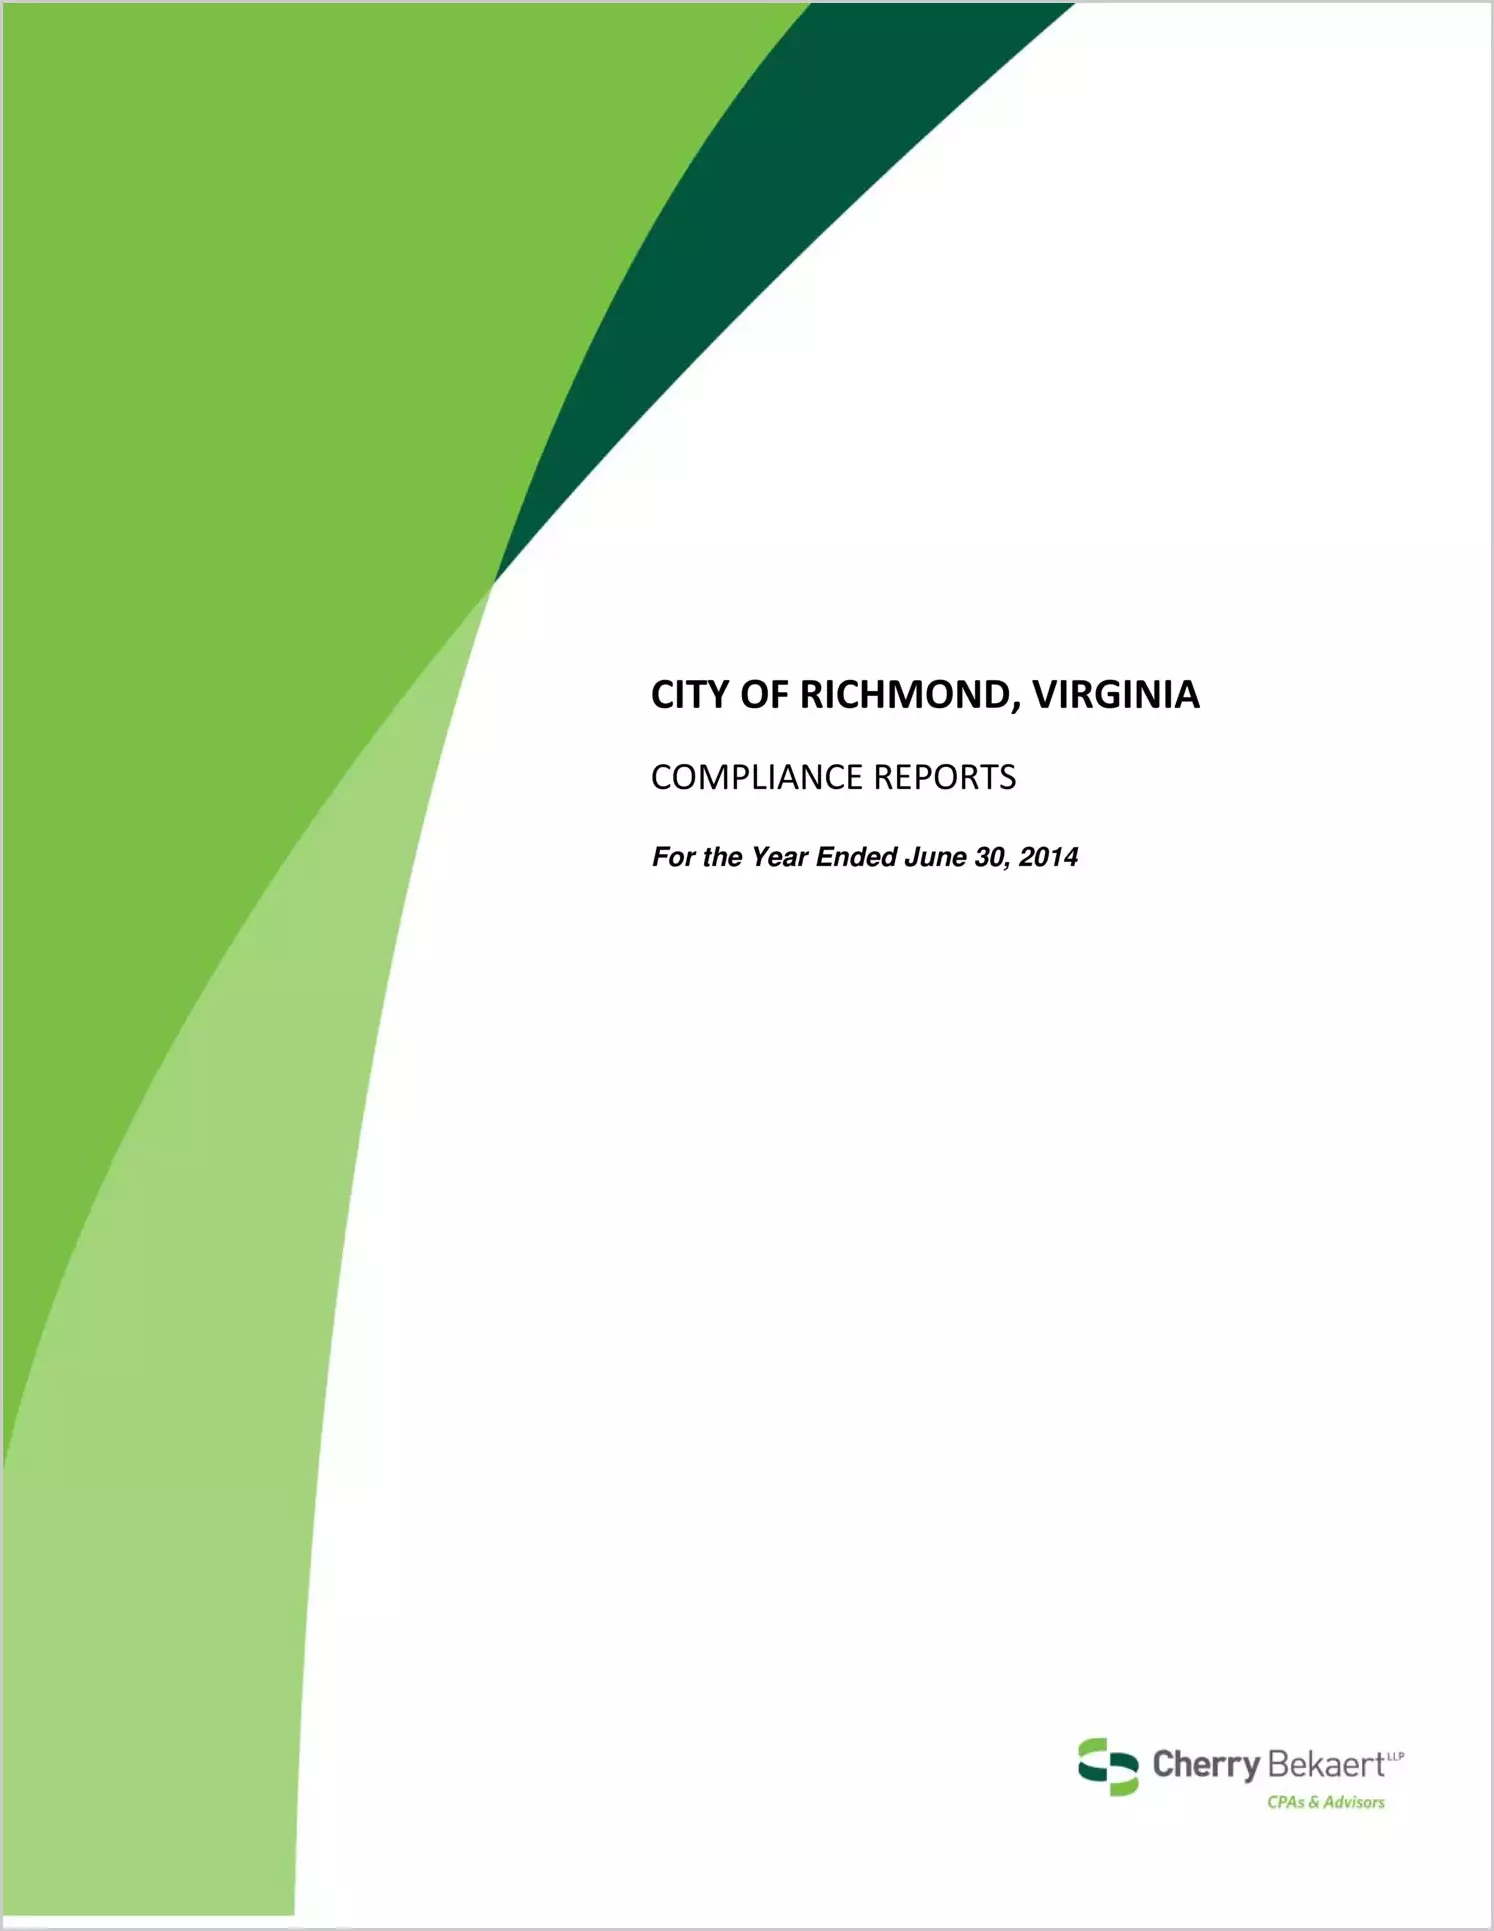 2014 Single Audit Report for City of Richmond